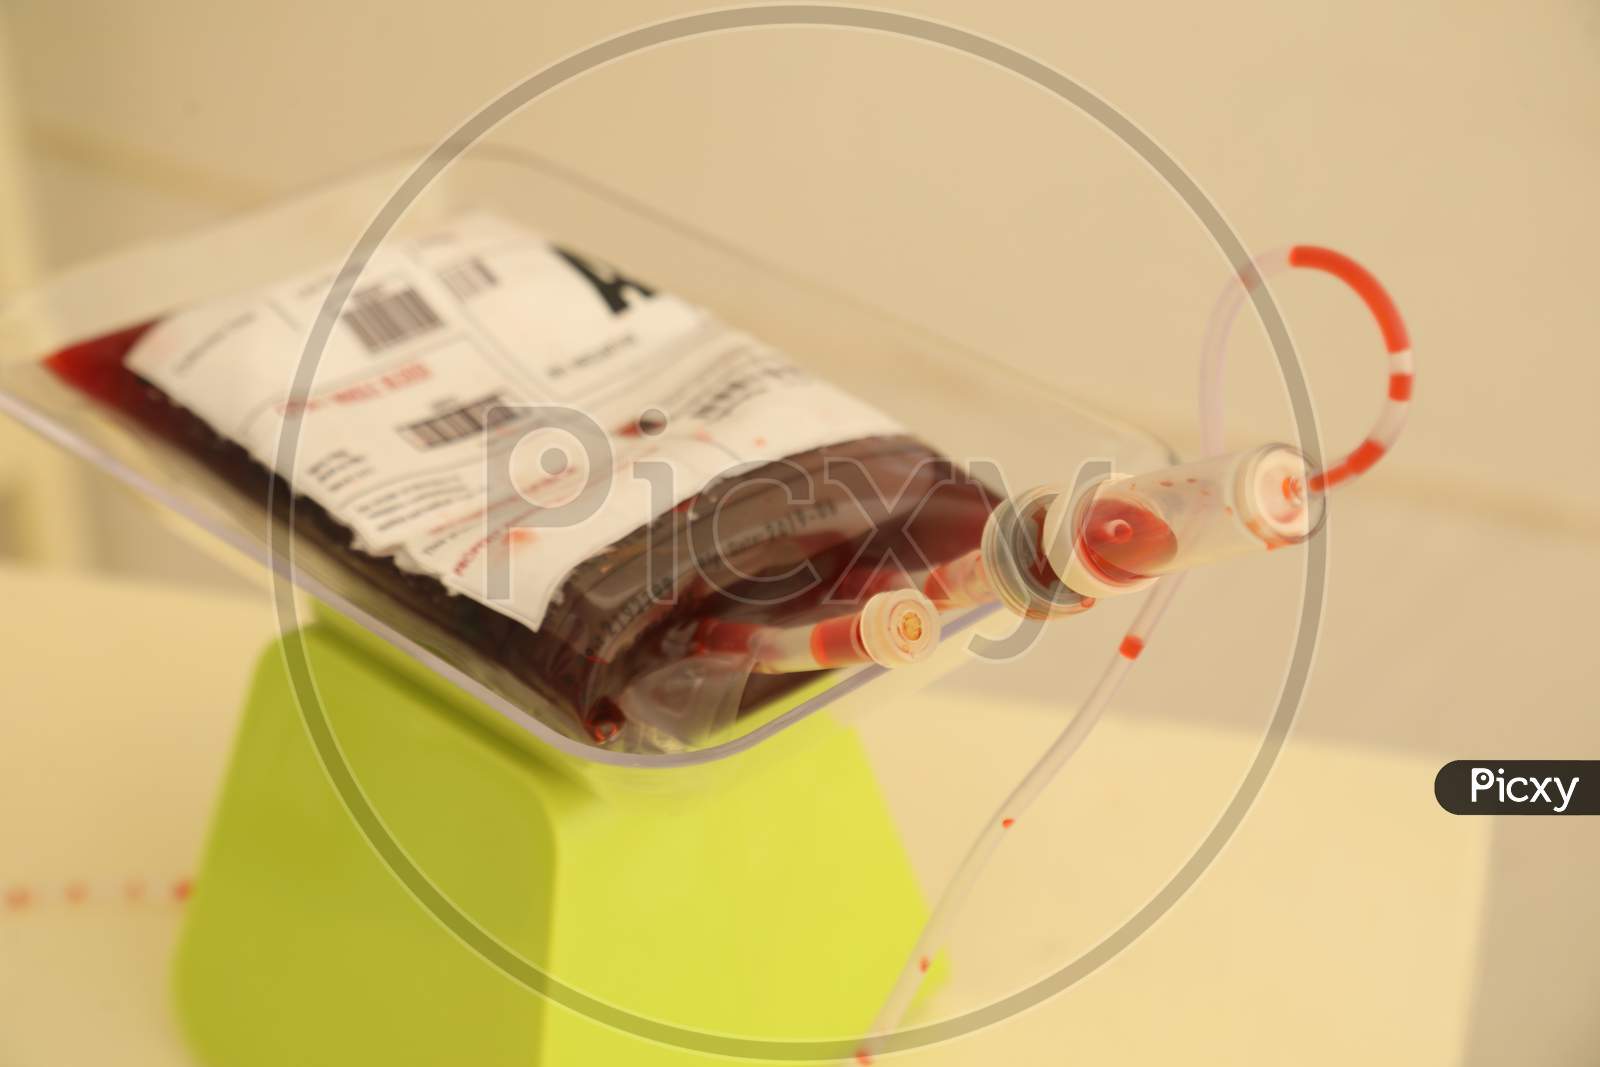 A Blood Packet